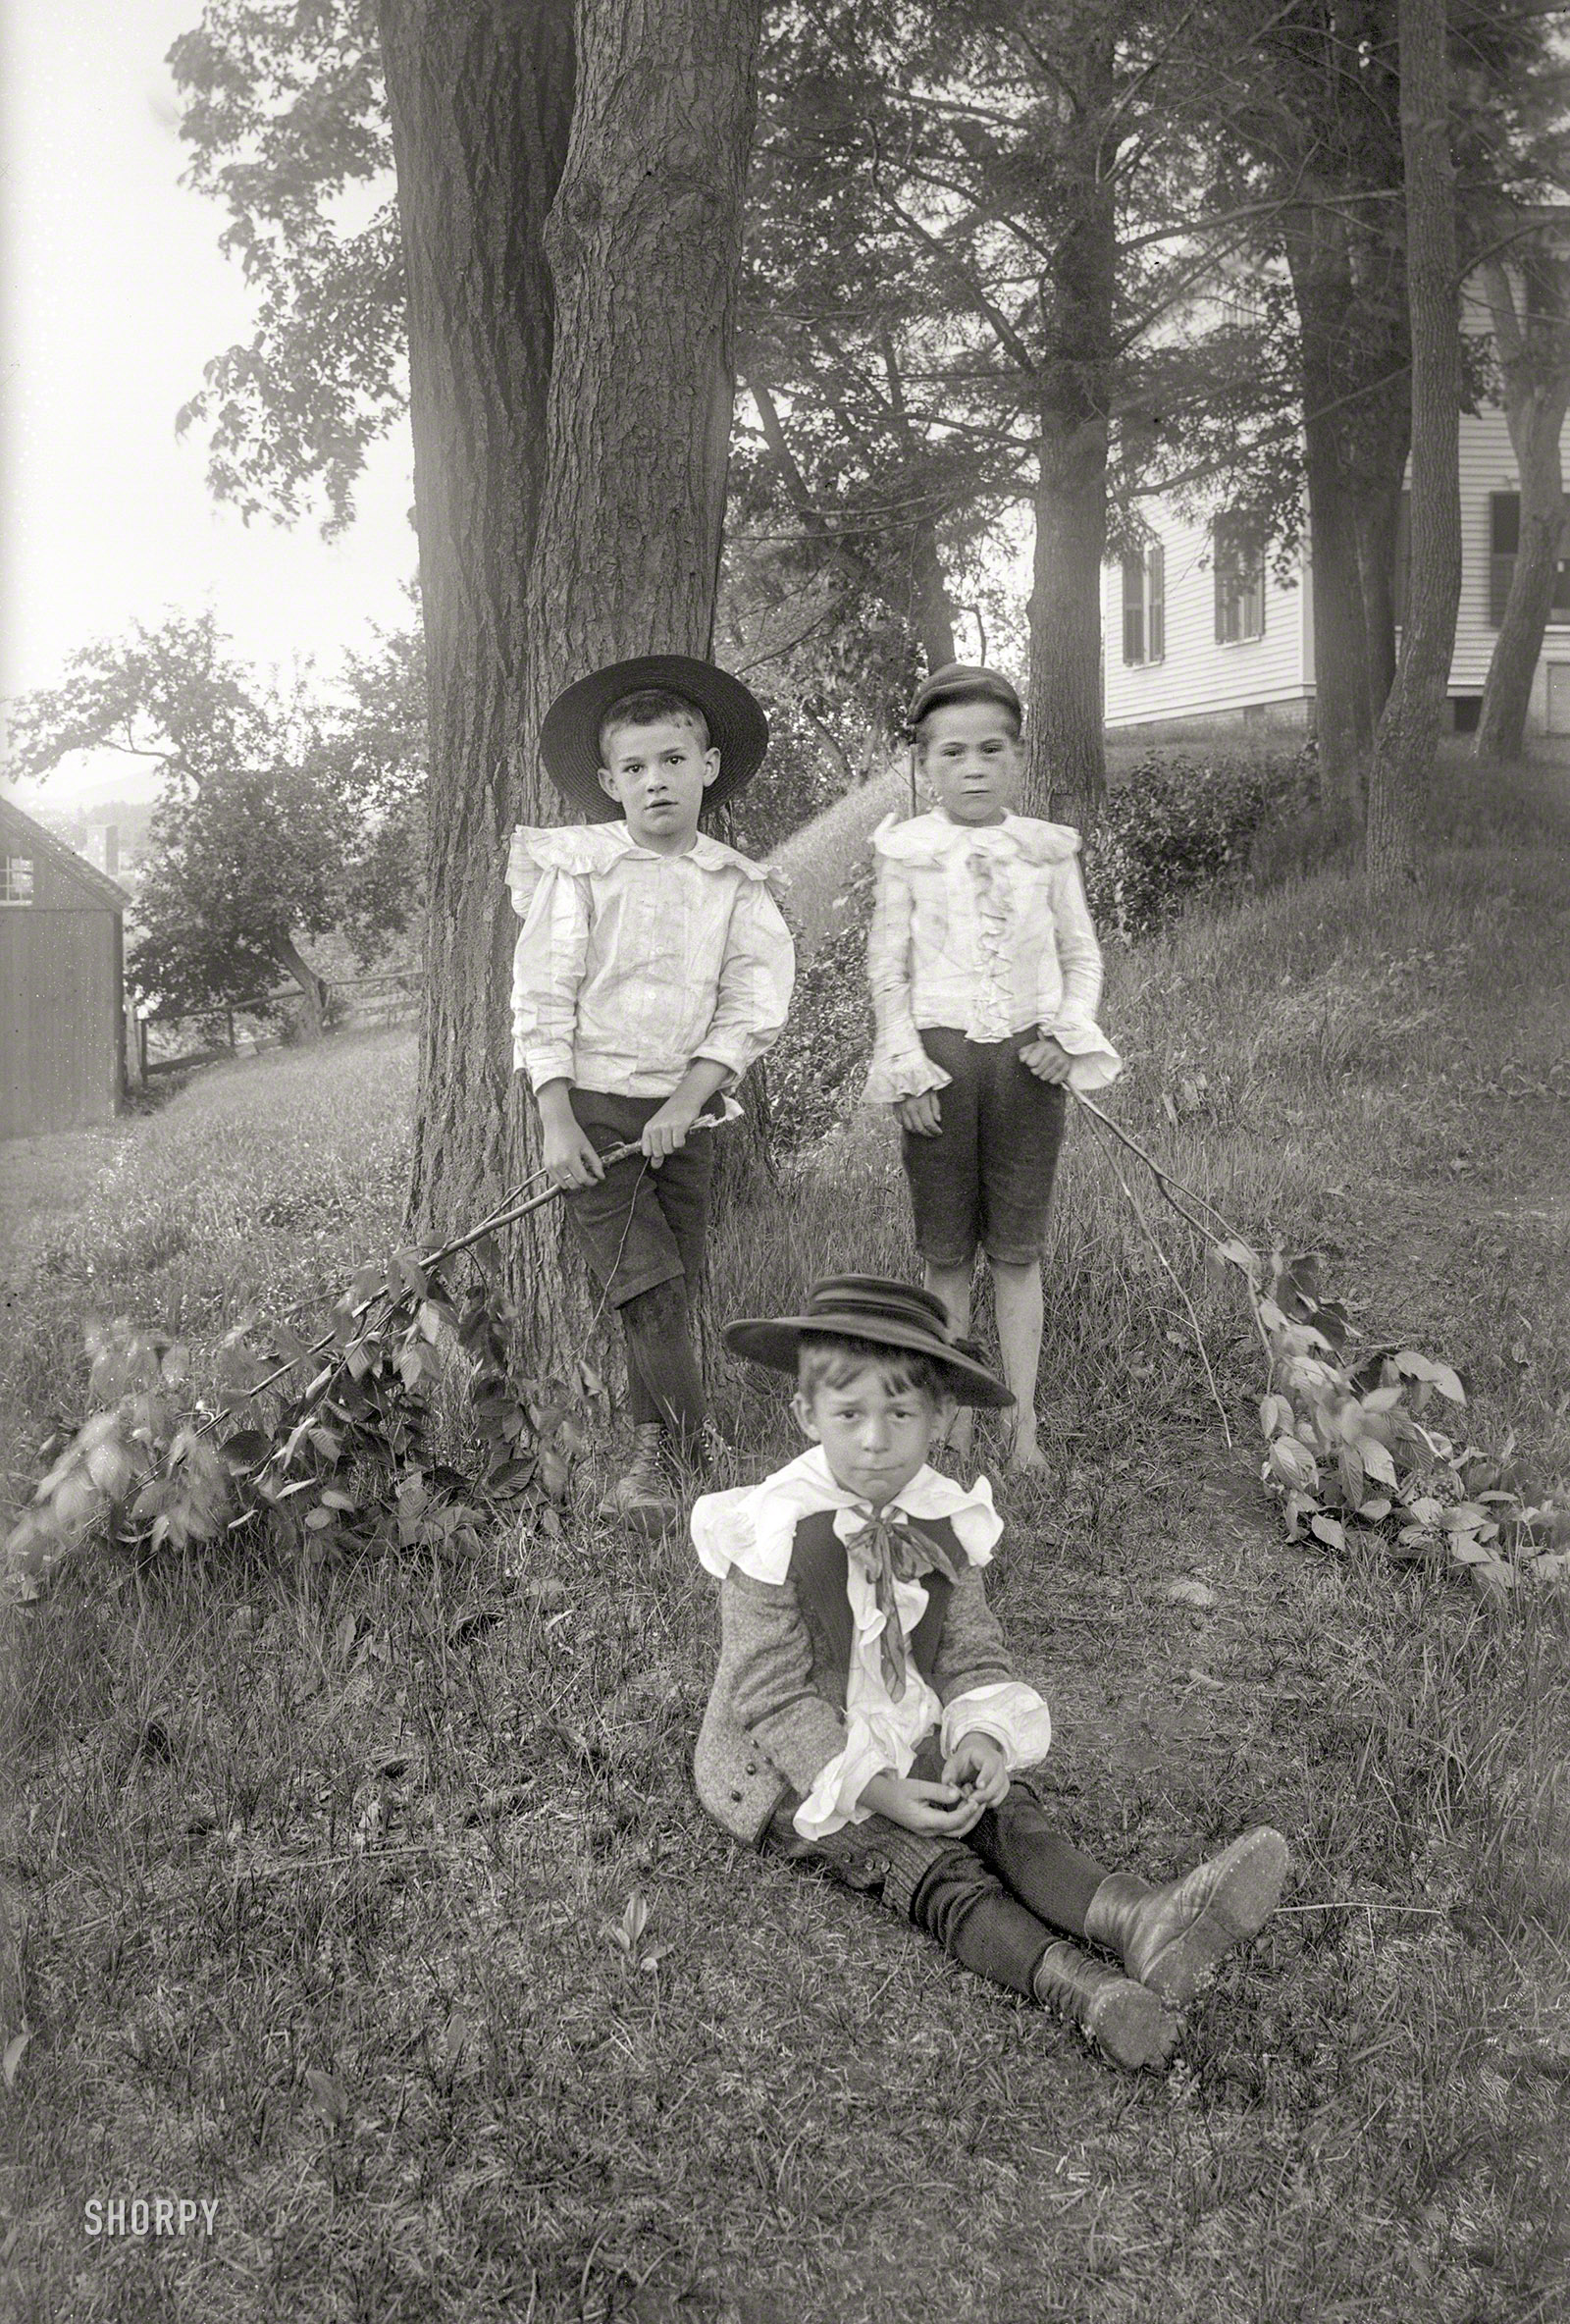 From New England circa 1900 comes a young fellow who looks like he'd rather be somewhere else, wearing anything but this ridiculous getup Aunt Polly made him put on. Good thing they haven't invented the Internet yet, kid. 5x8 inch glass negative, probably an estate-sale find. View full size.